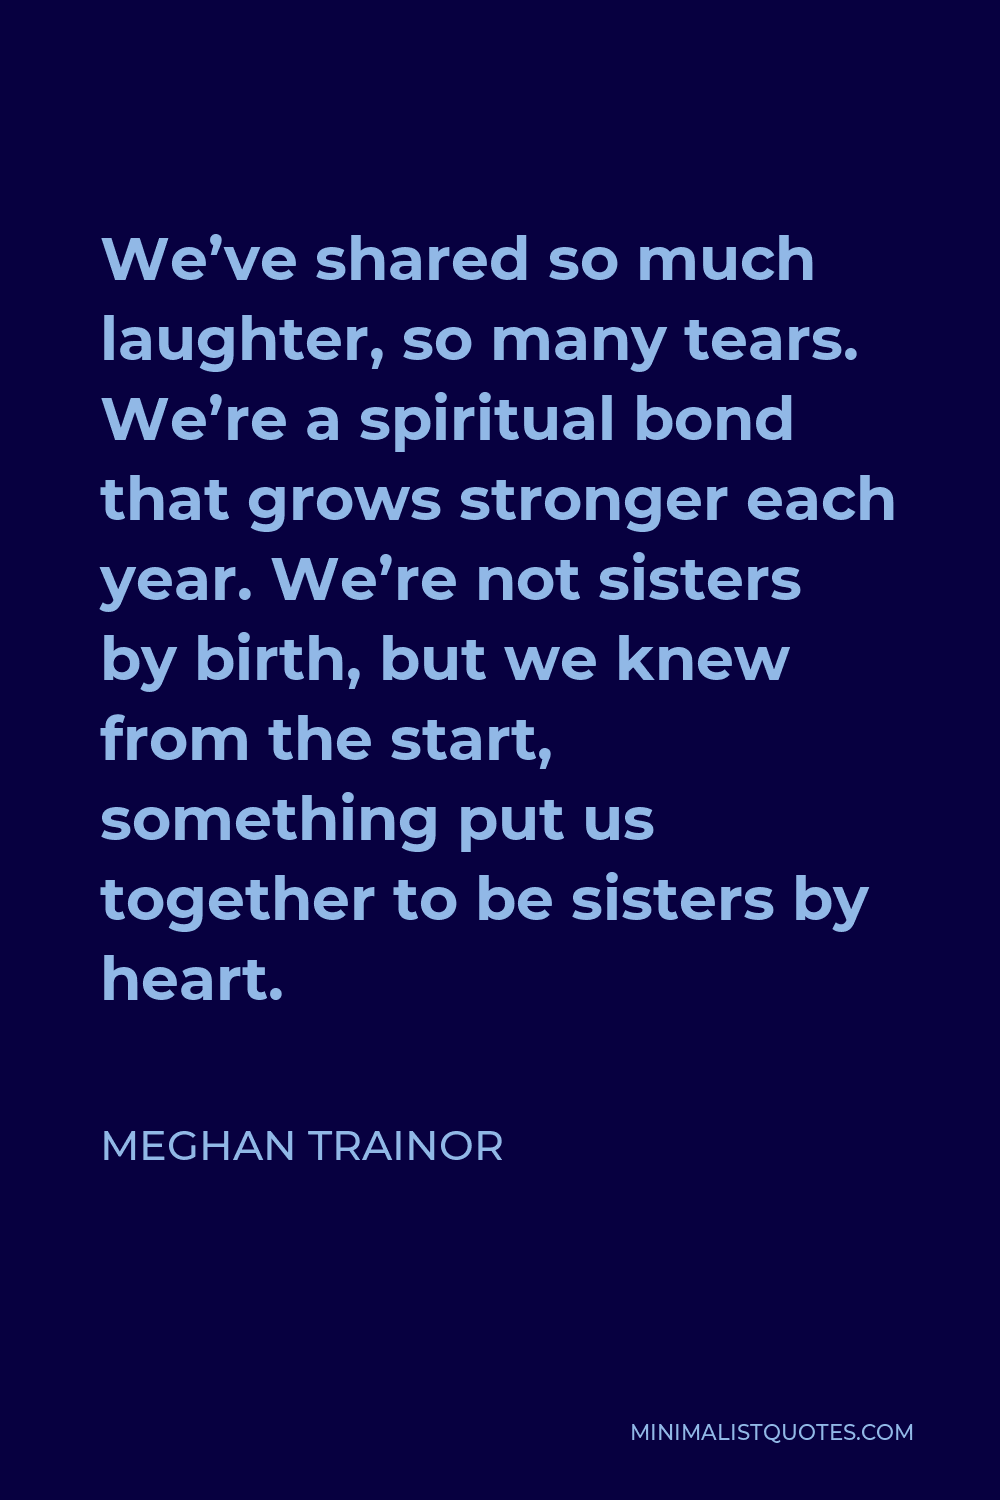 Meghan Trainor Quote: We've shared so much laughter, so many tears ...